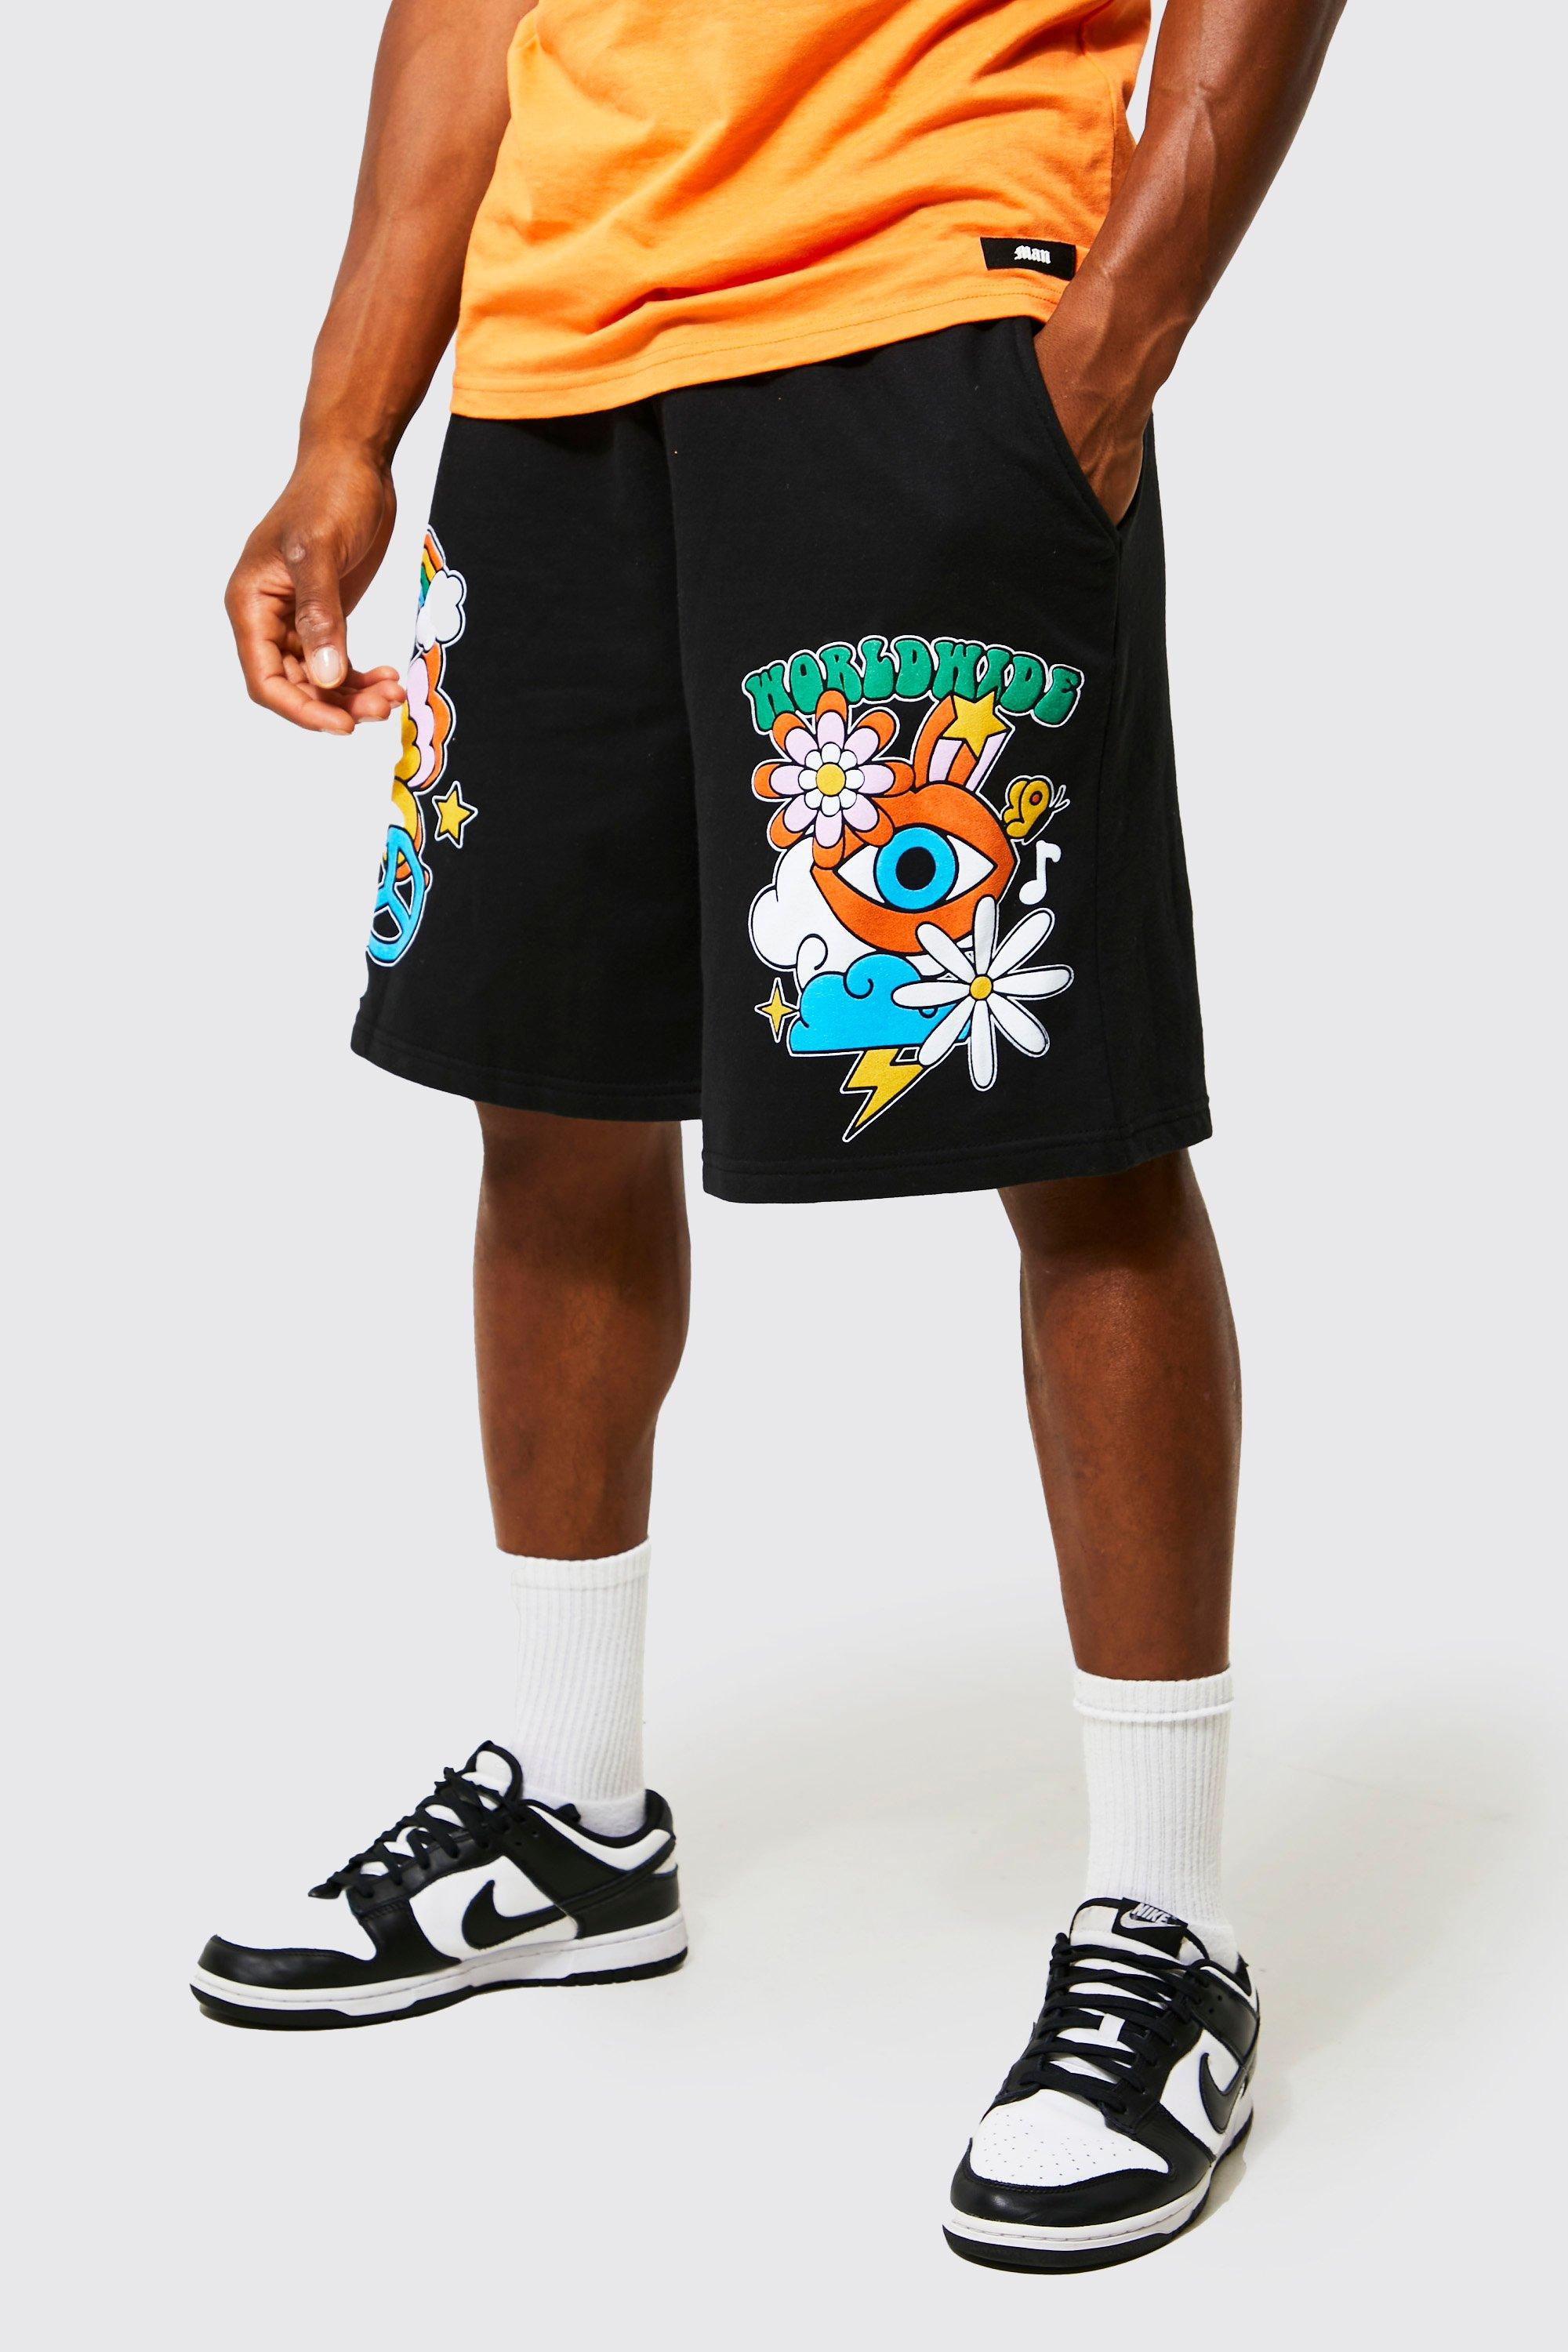 boohooMAN Men's Loose Fit Faux Layer Trippy Graphic Shorts